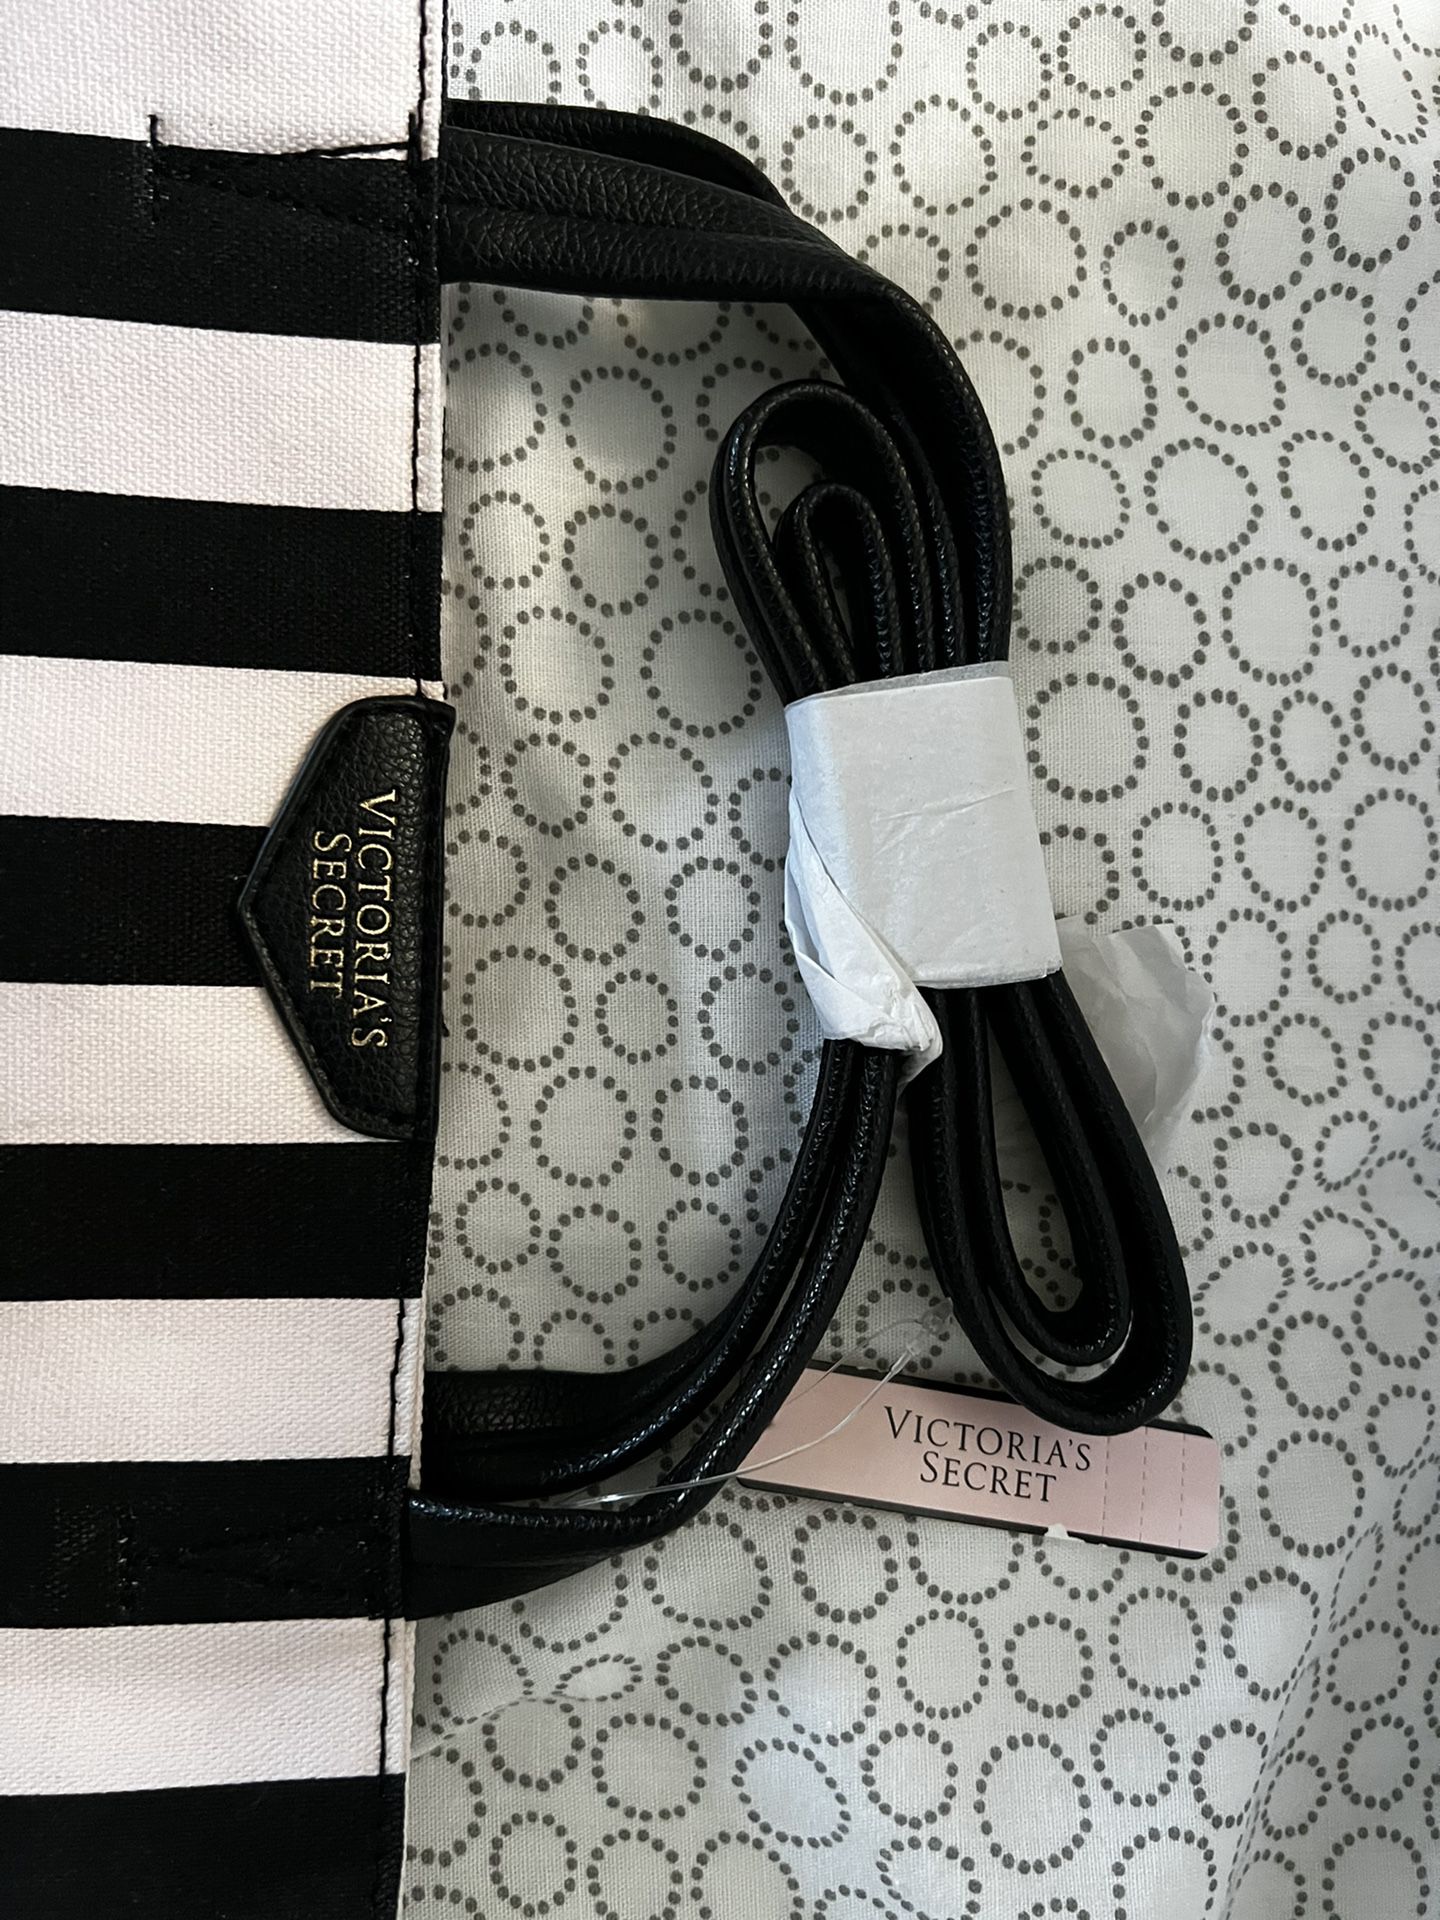 Victorias Secret Tote Bag for Sale in Los Angeles, CA - OfferUp